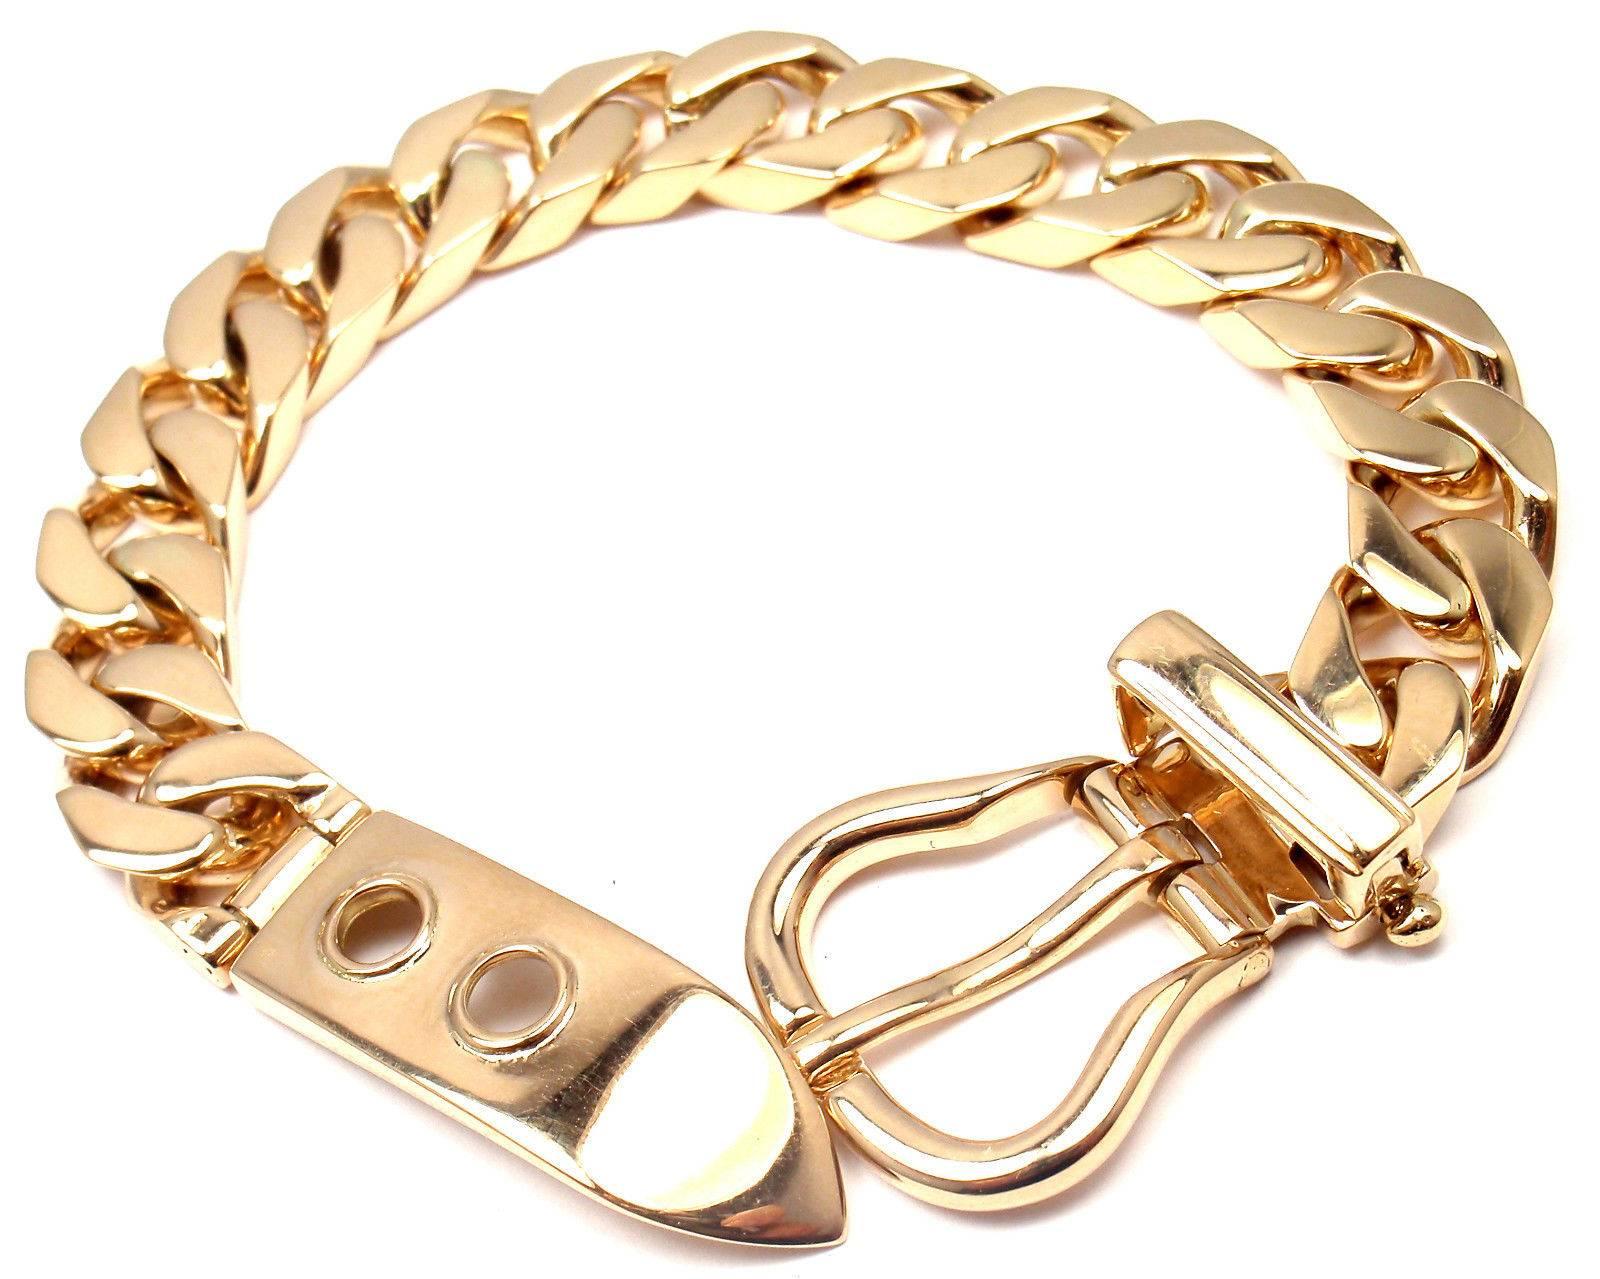 18k Yellow Gold Curb Link Chain Large Buckle Bracelet by Hermes.

Details:
Length: 8"
Buckle Width: 22mm
Link Width: 12mm
Weight: 66 grams
Stamped Hallmarks: Hermes 750 French Hallmarks
*Free Shipping within the United States*

YOUR